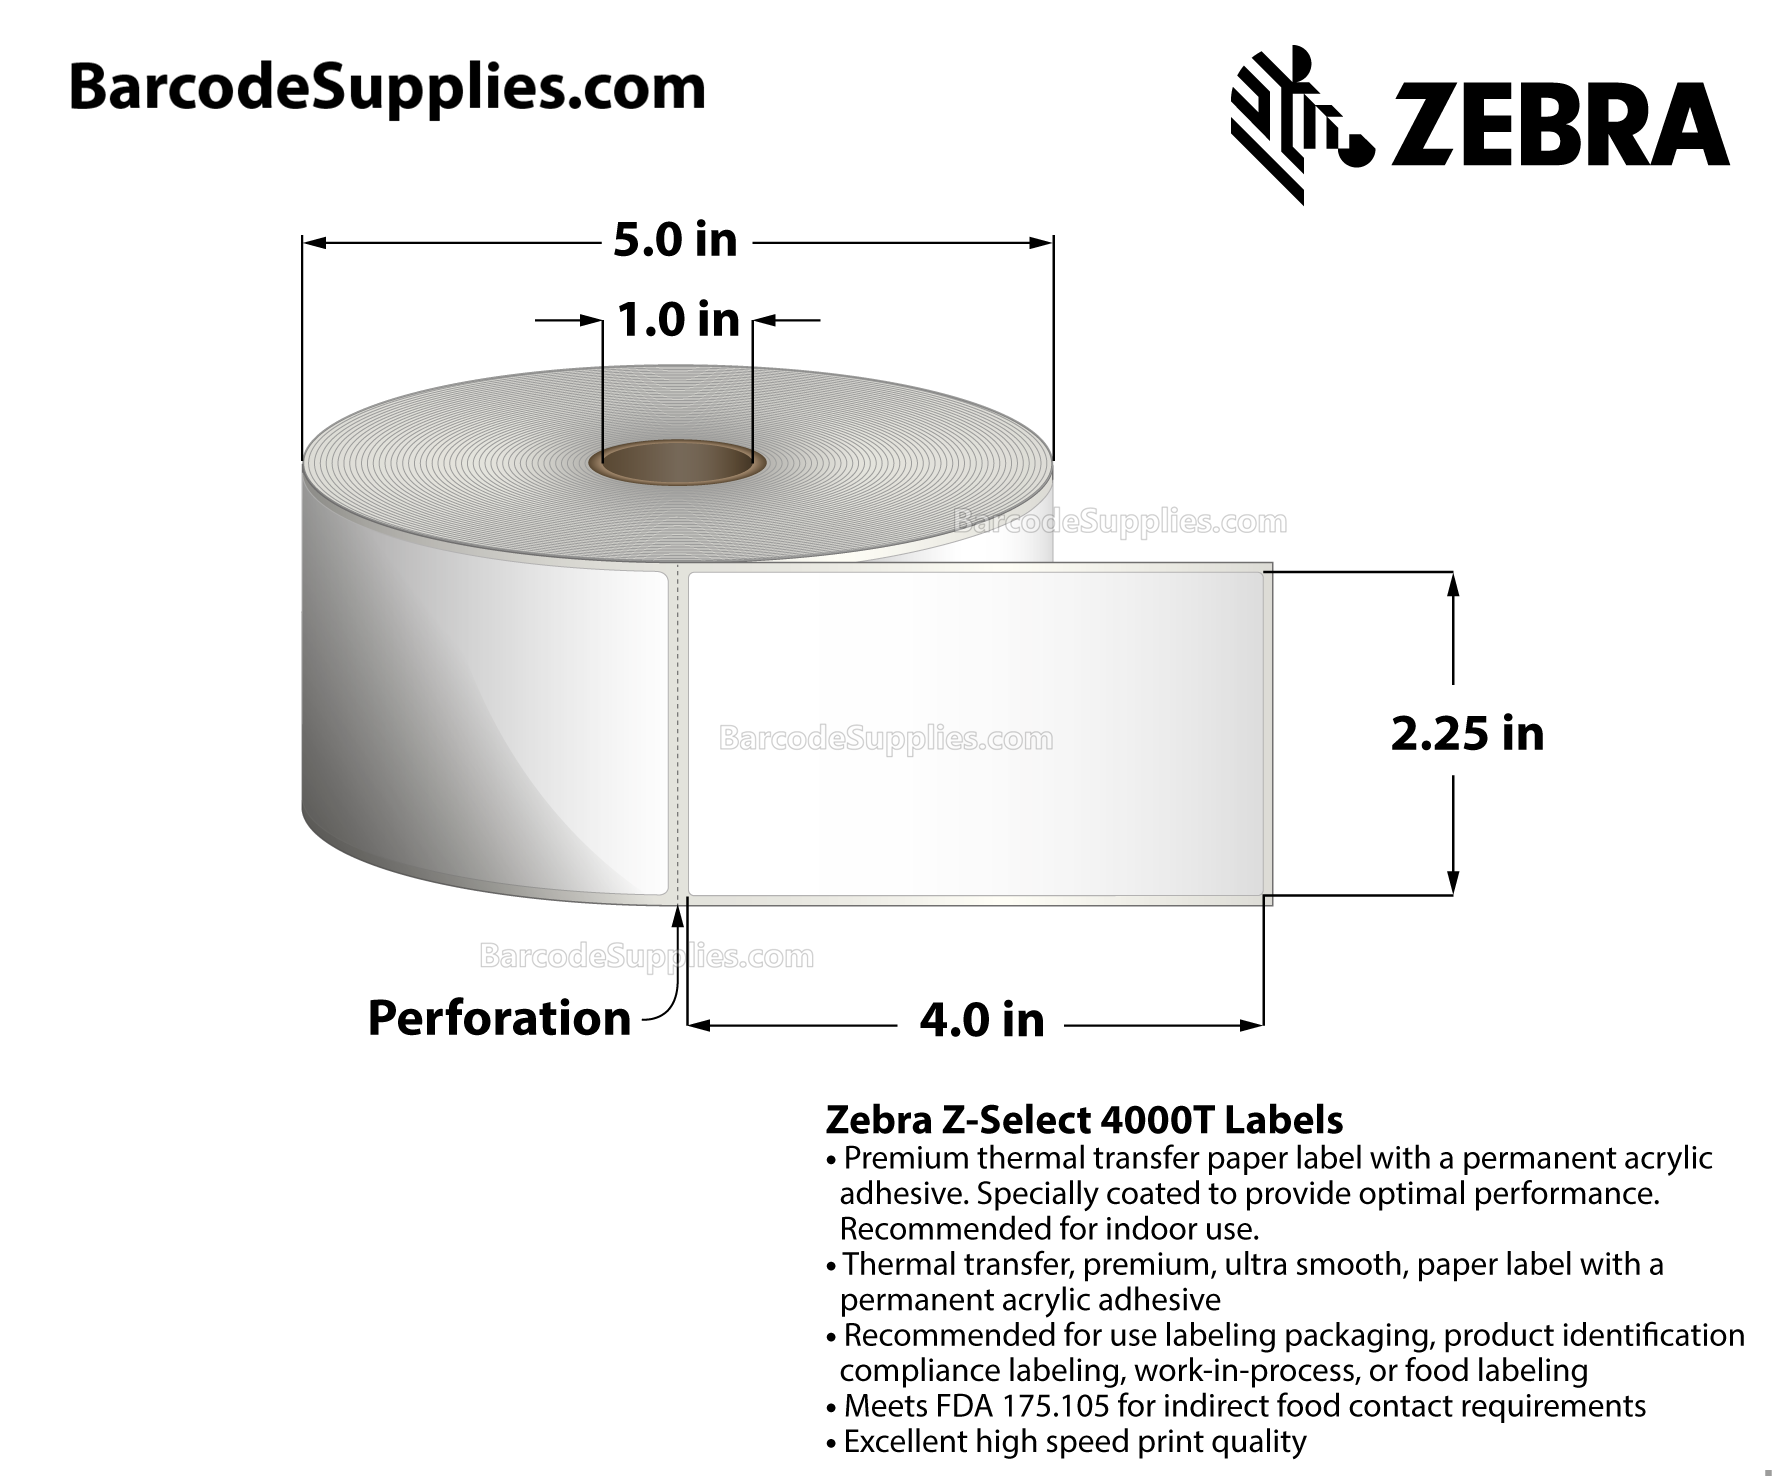 2.25 x 4 Thermal Transfer White Z-Select 4000T Labels With Permanent Adhesive - Perforated - 700 Labels Per Roll - Carton Of 6 Rolls - 4200 Labels Total - MPN: 10009527